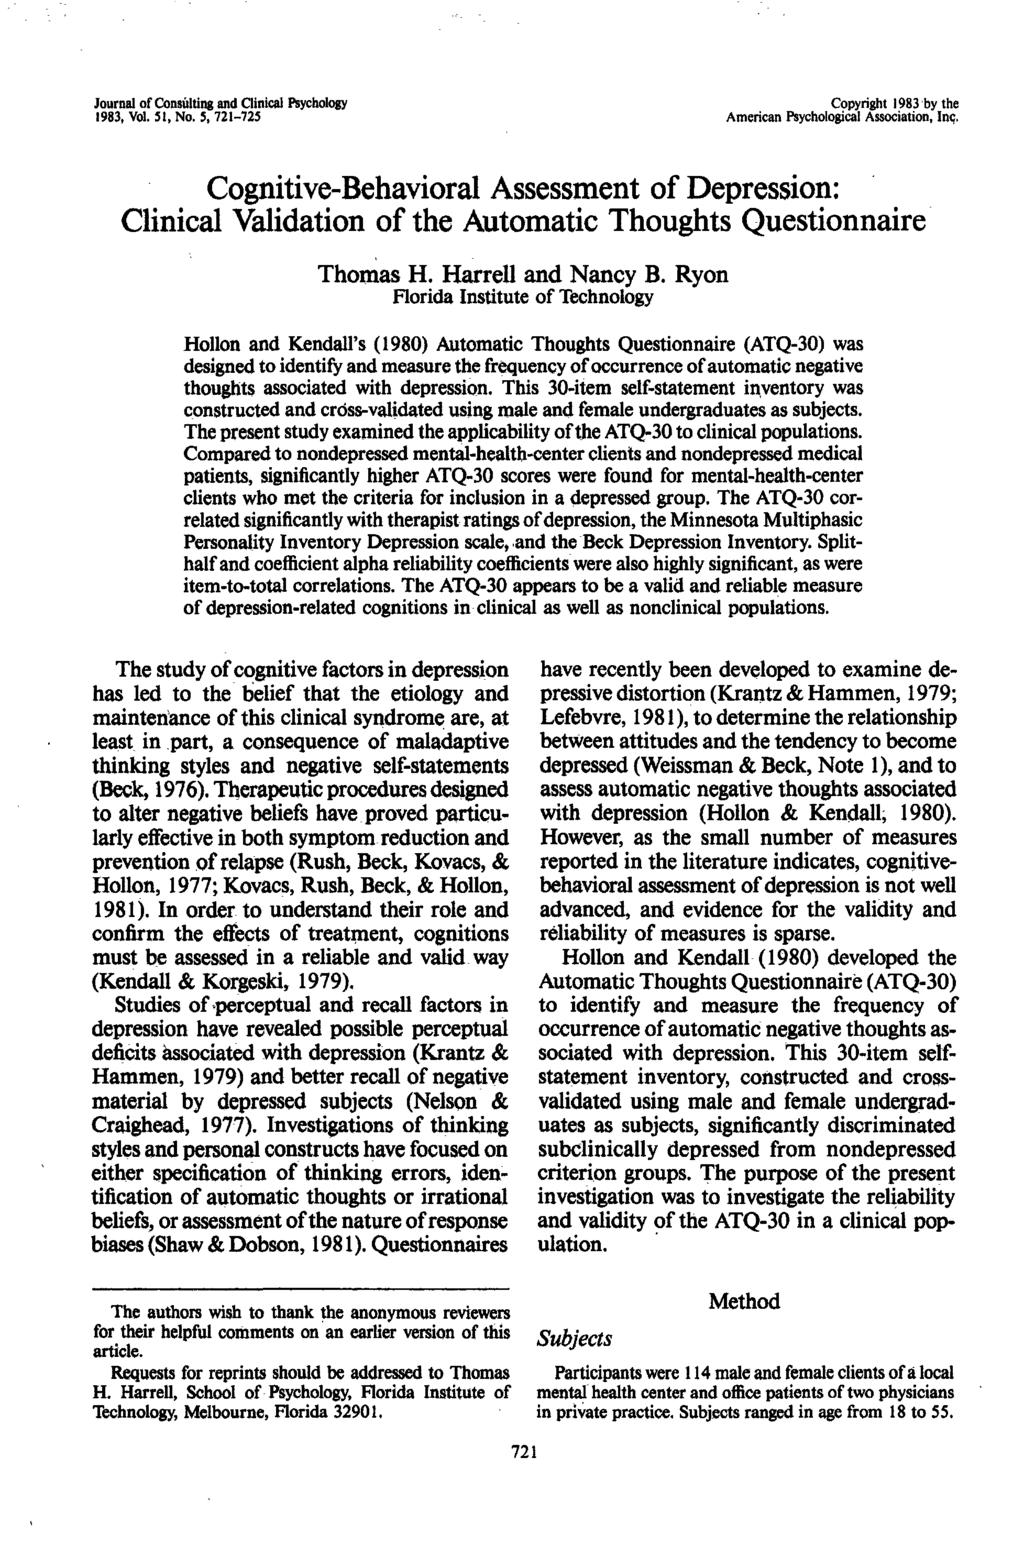 Journal of Consulting and Clinical Psychology 1983, Vol. 51, No. 5, 721-725 Copyright 1983 by the American Psychological Association, Inc.